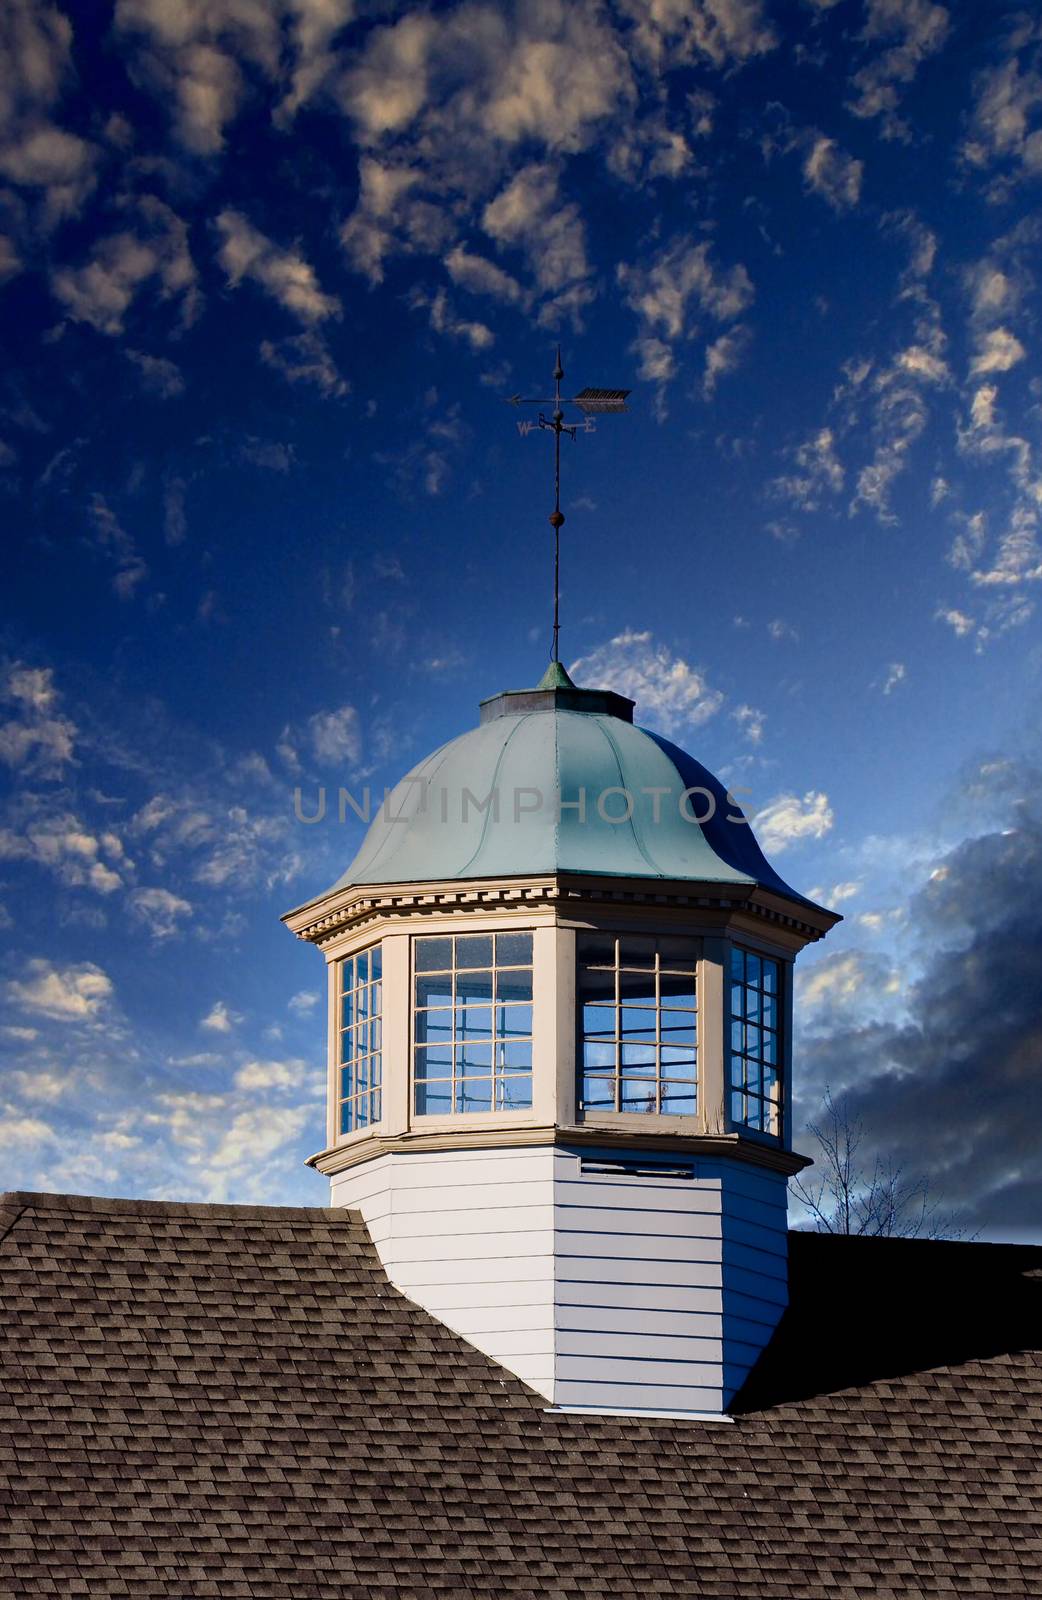 A weather van on an old fashioned cupola on a roof